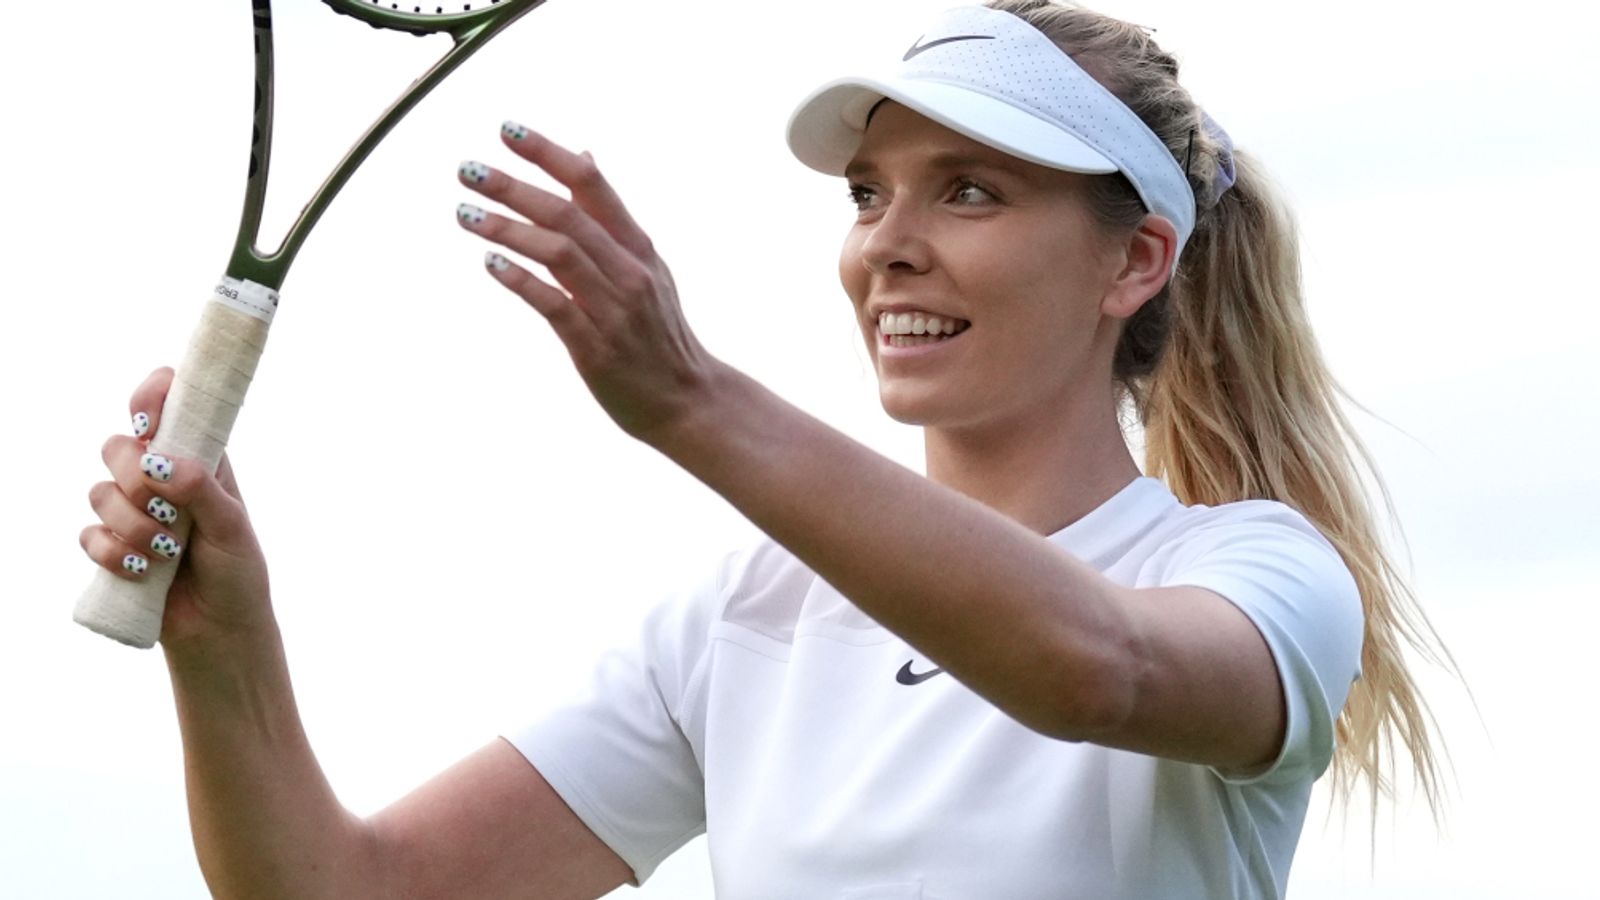 Wimbledon 2022: Rafael Nadal, Katie Boulter and Jack Draper in action on Thursday